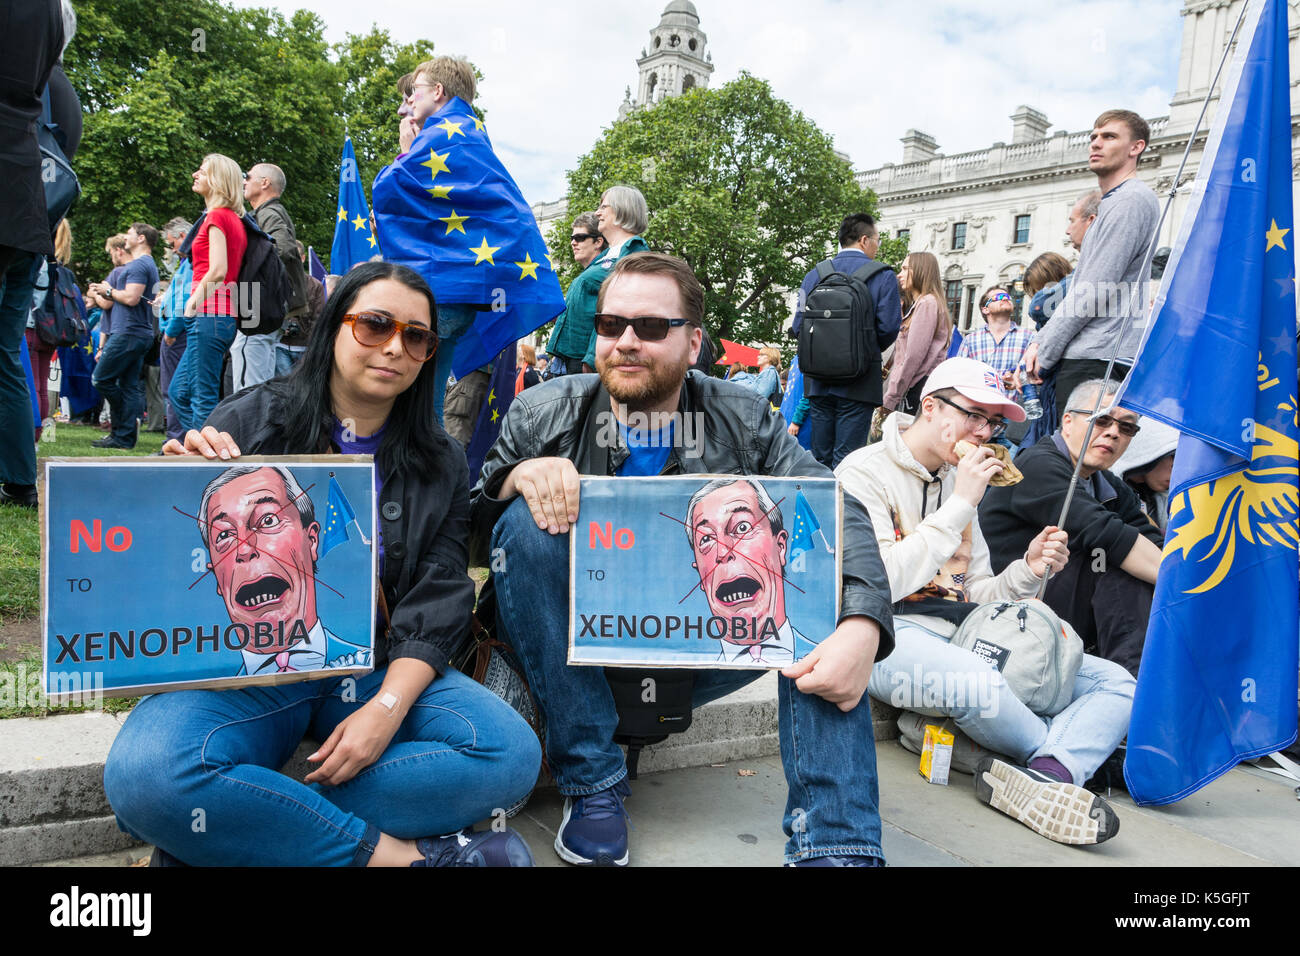 London, UK. 09th Sep, 2017. Exit from Brexit demonstration in Parliament Square, Westminster. Marchers demand that Britain stays in the European Union. Credit: Benjamin John/Alamy Live News Stock Photo